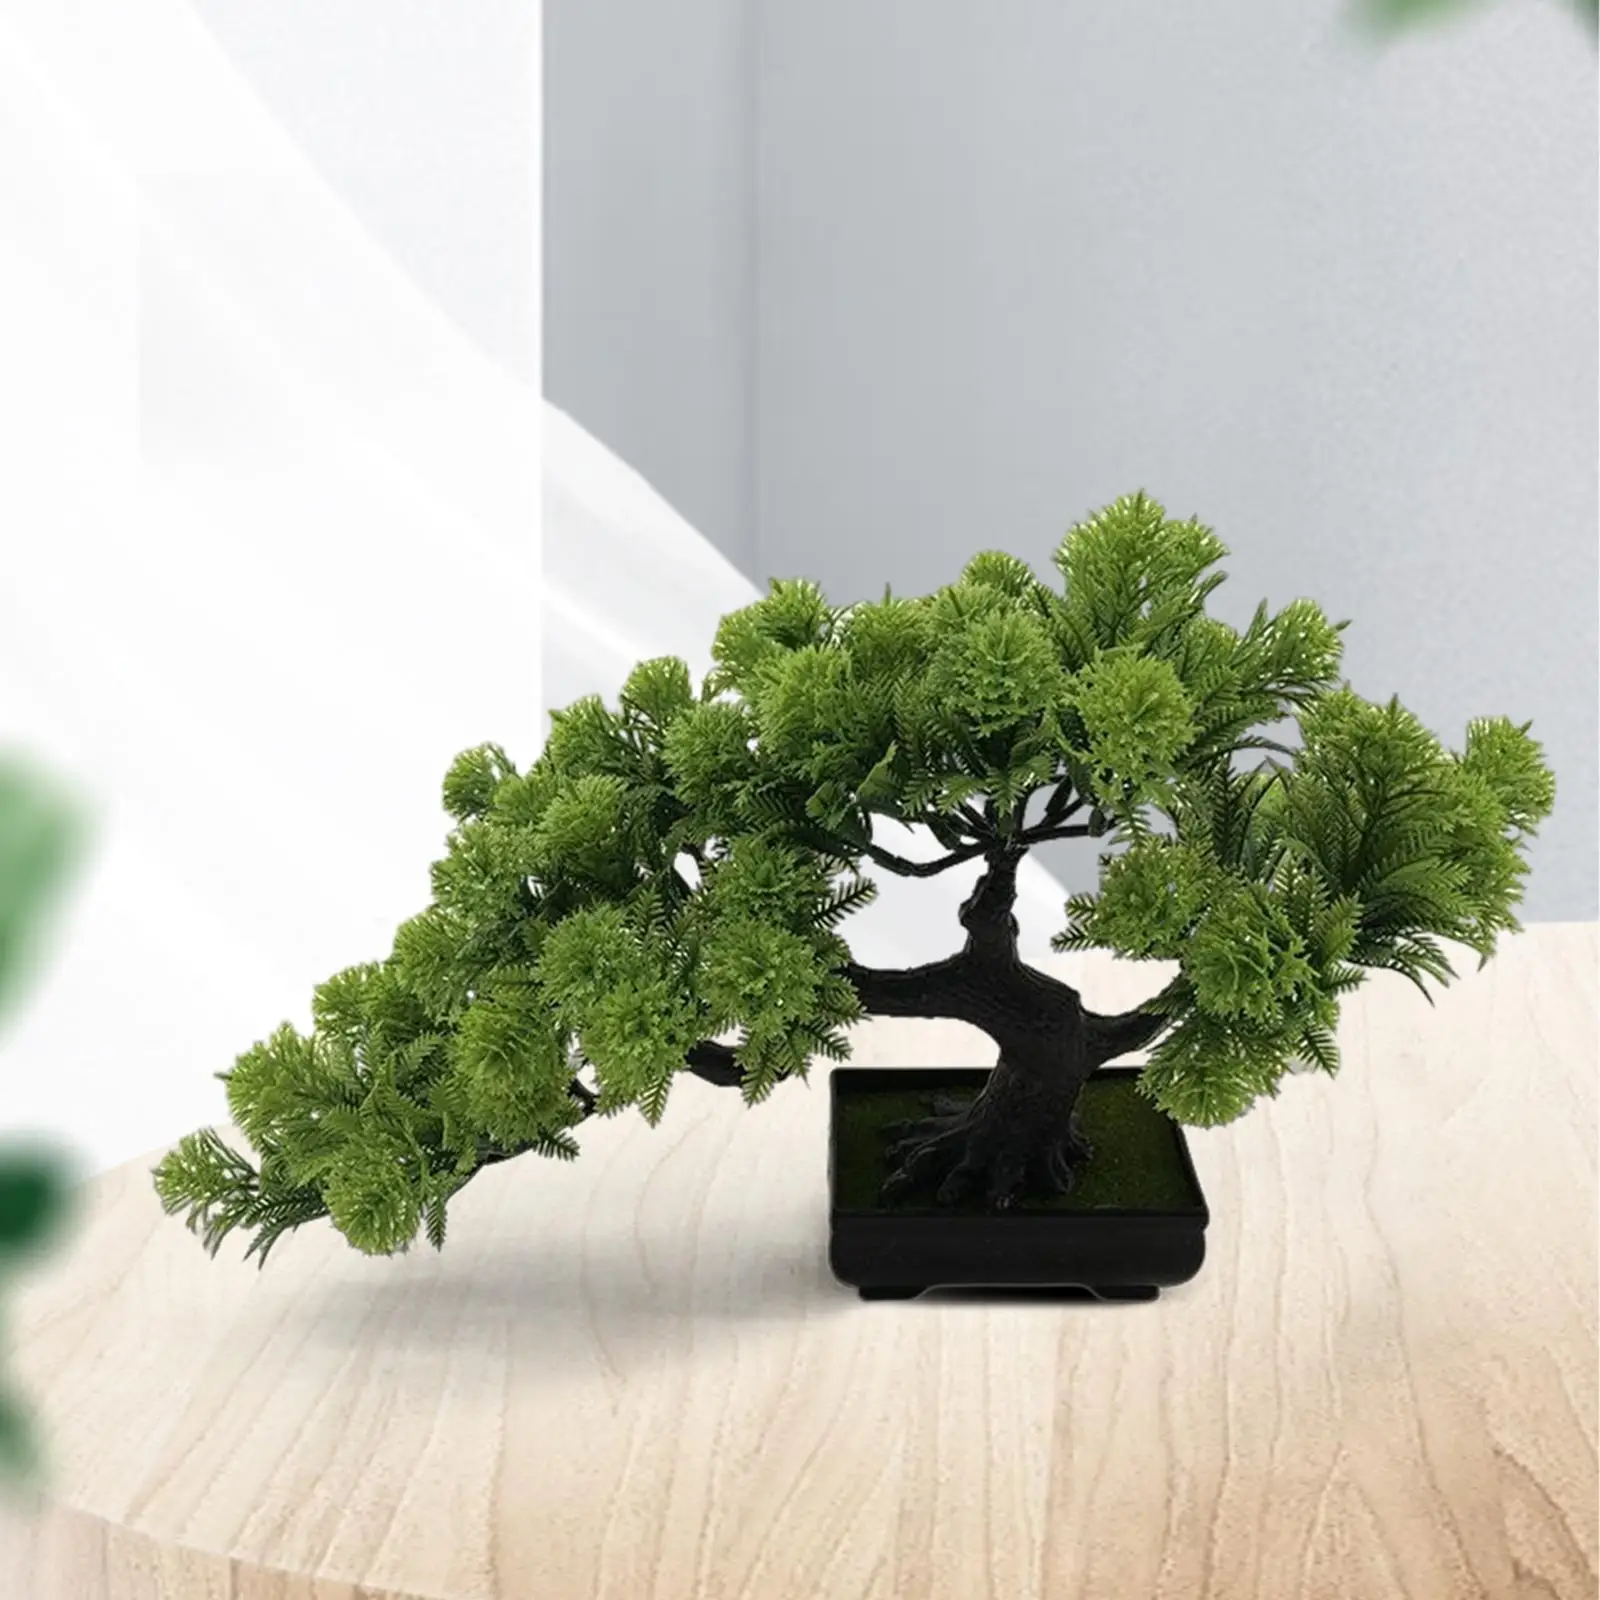 Small Artificial Bonsai Pine Tree Simulation Bonsai Potted Desktop Display Tree for Windowsill Indoor Home Office Decor